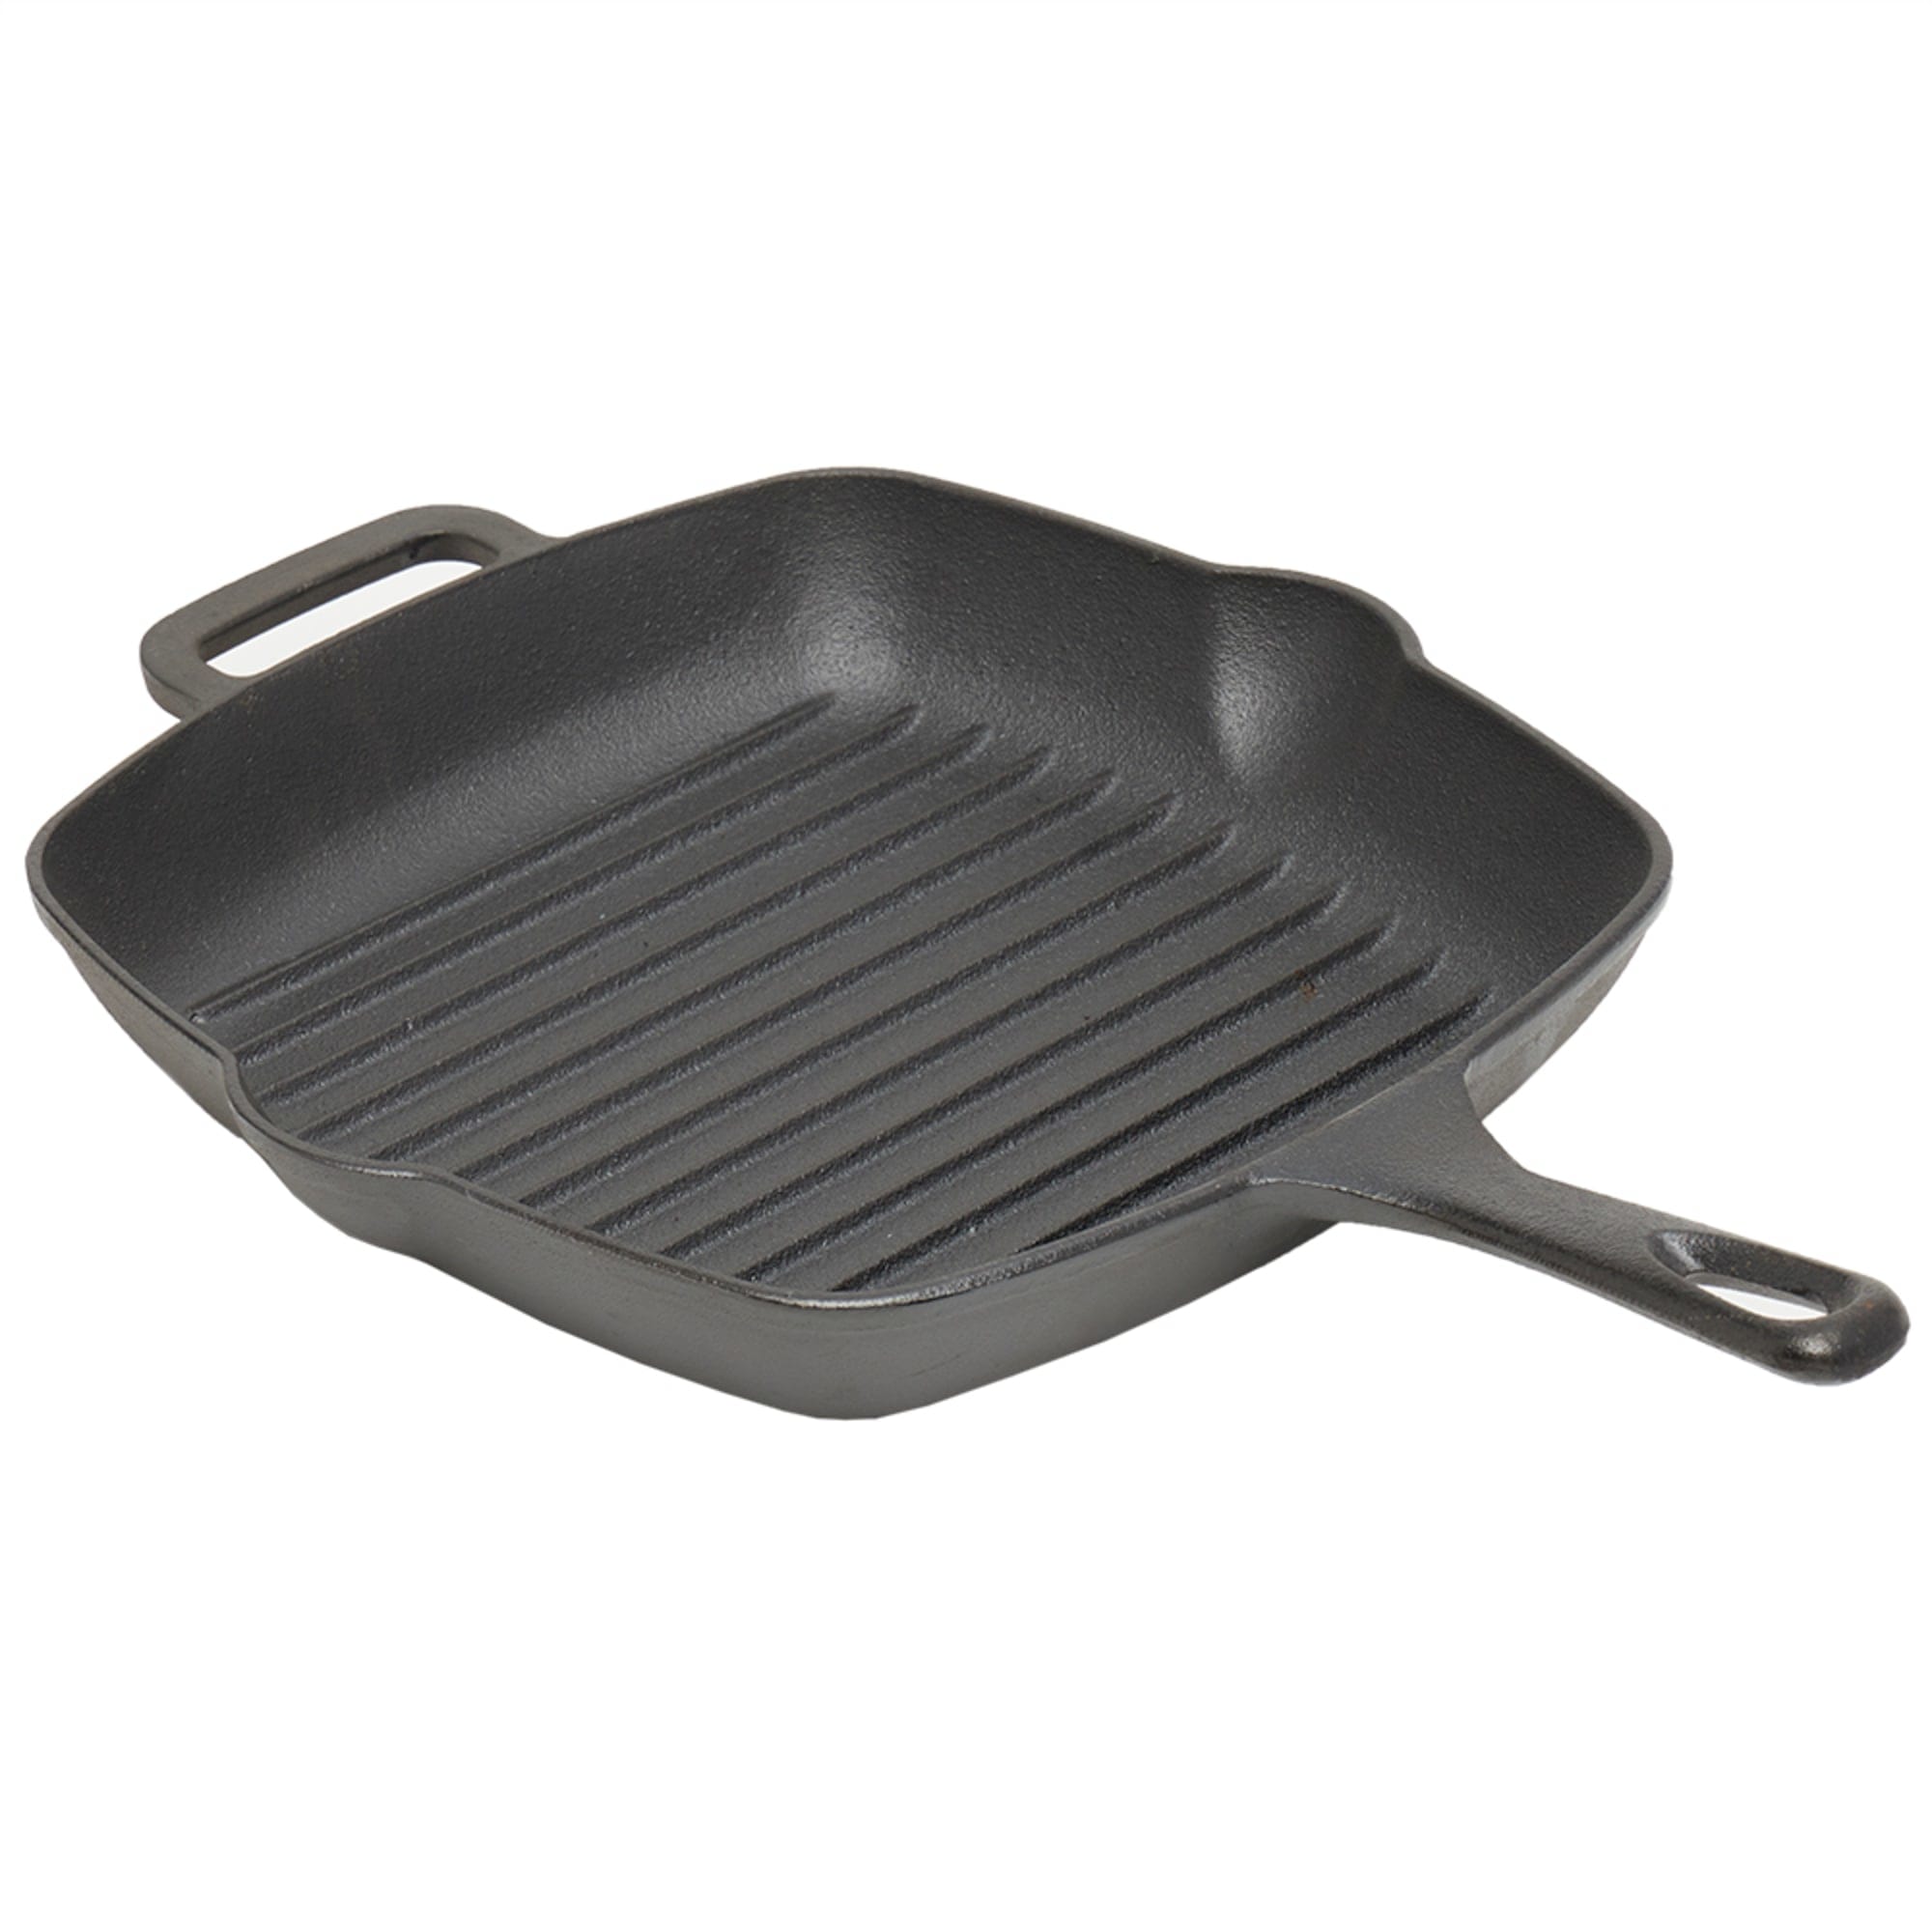 Home Basics 10-inch Pre-Seasoned Cast Iron Square Grill Pan $20.00 EACH, CASE PACK OF 1